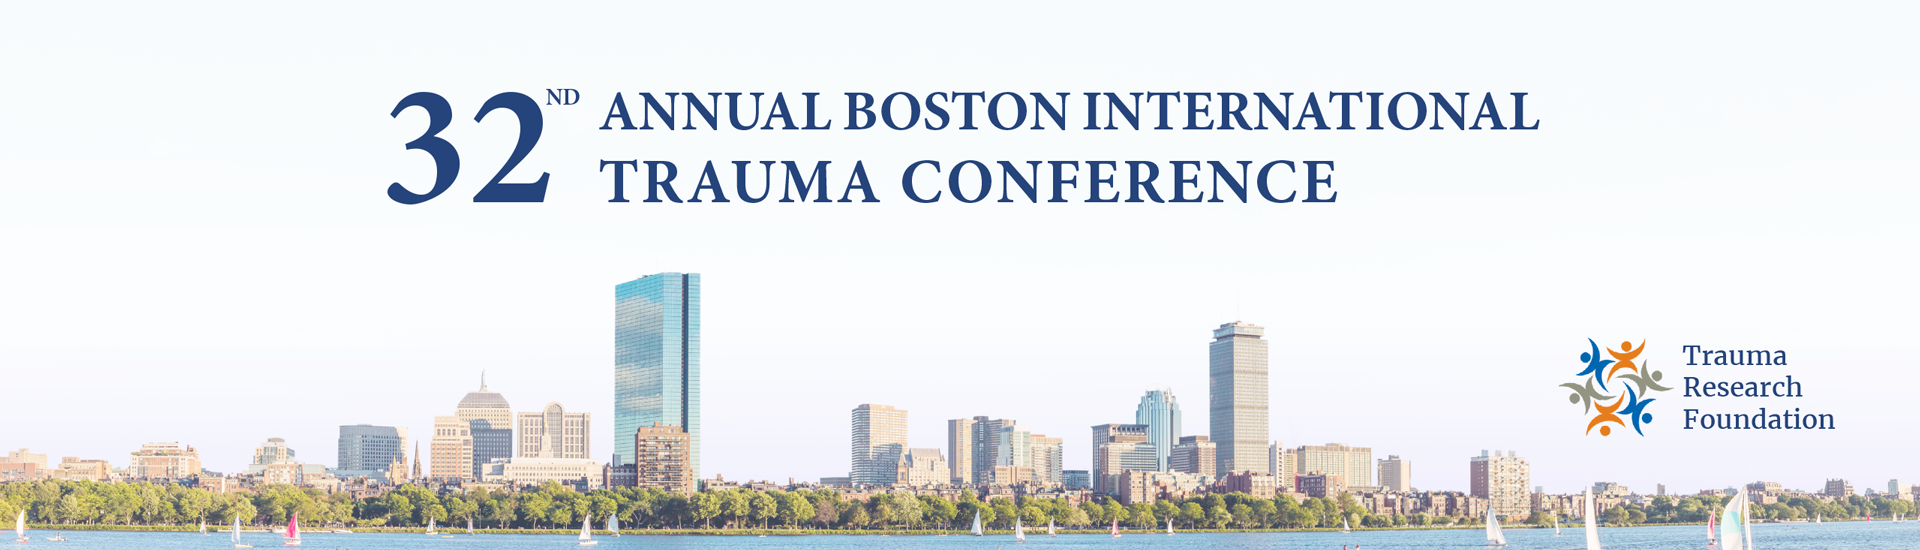 32nd Annual Boston International Trauma Conference | Psychological Trauma: Neuroscience, embodiment and the restoration of the self